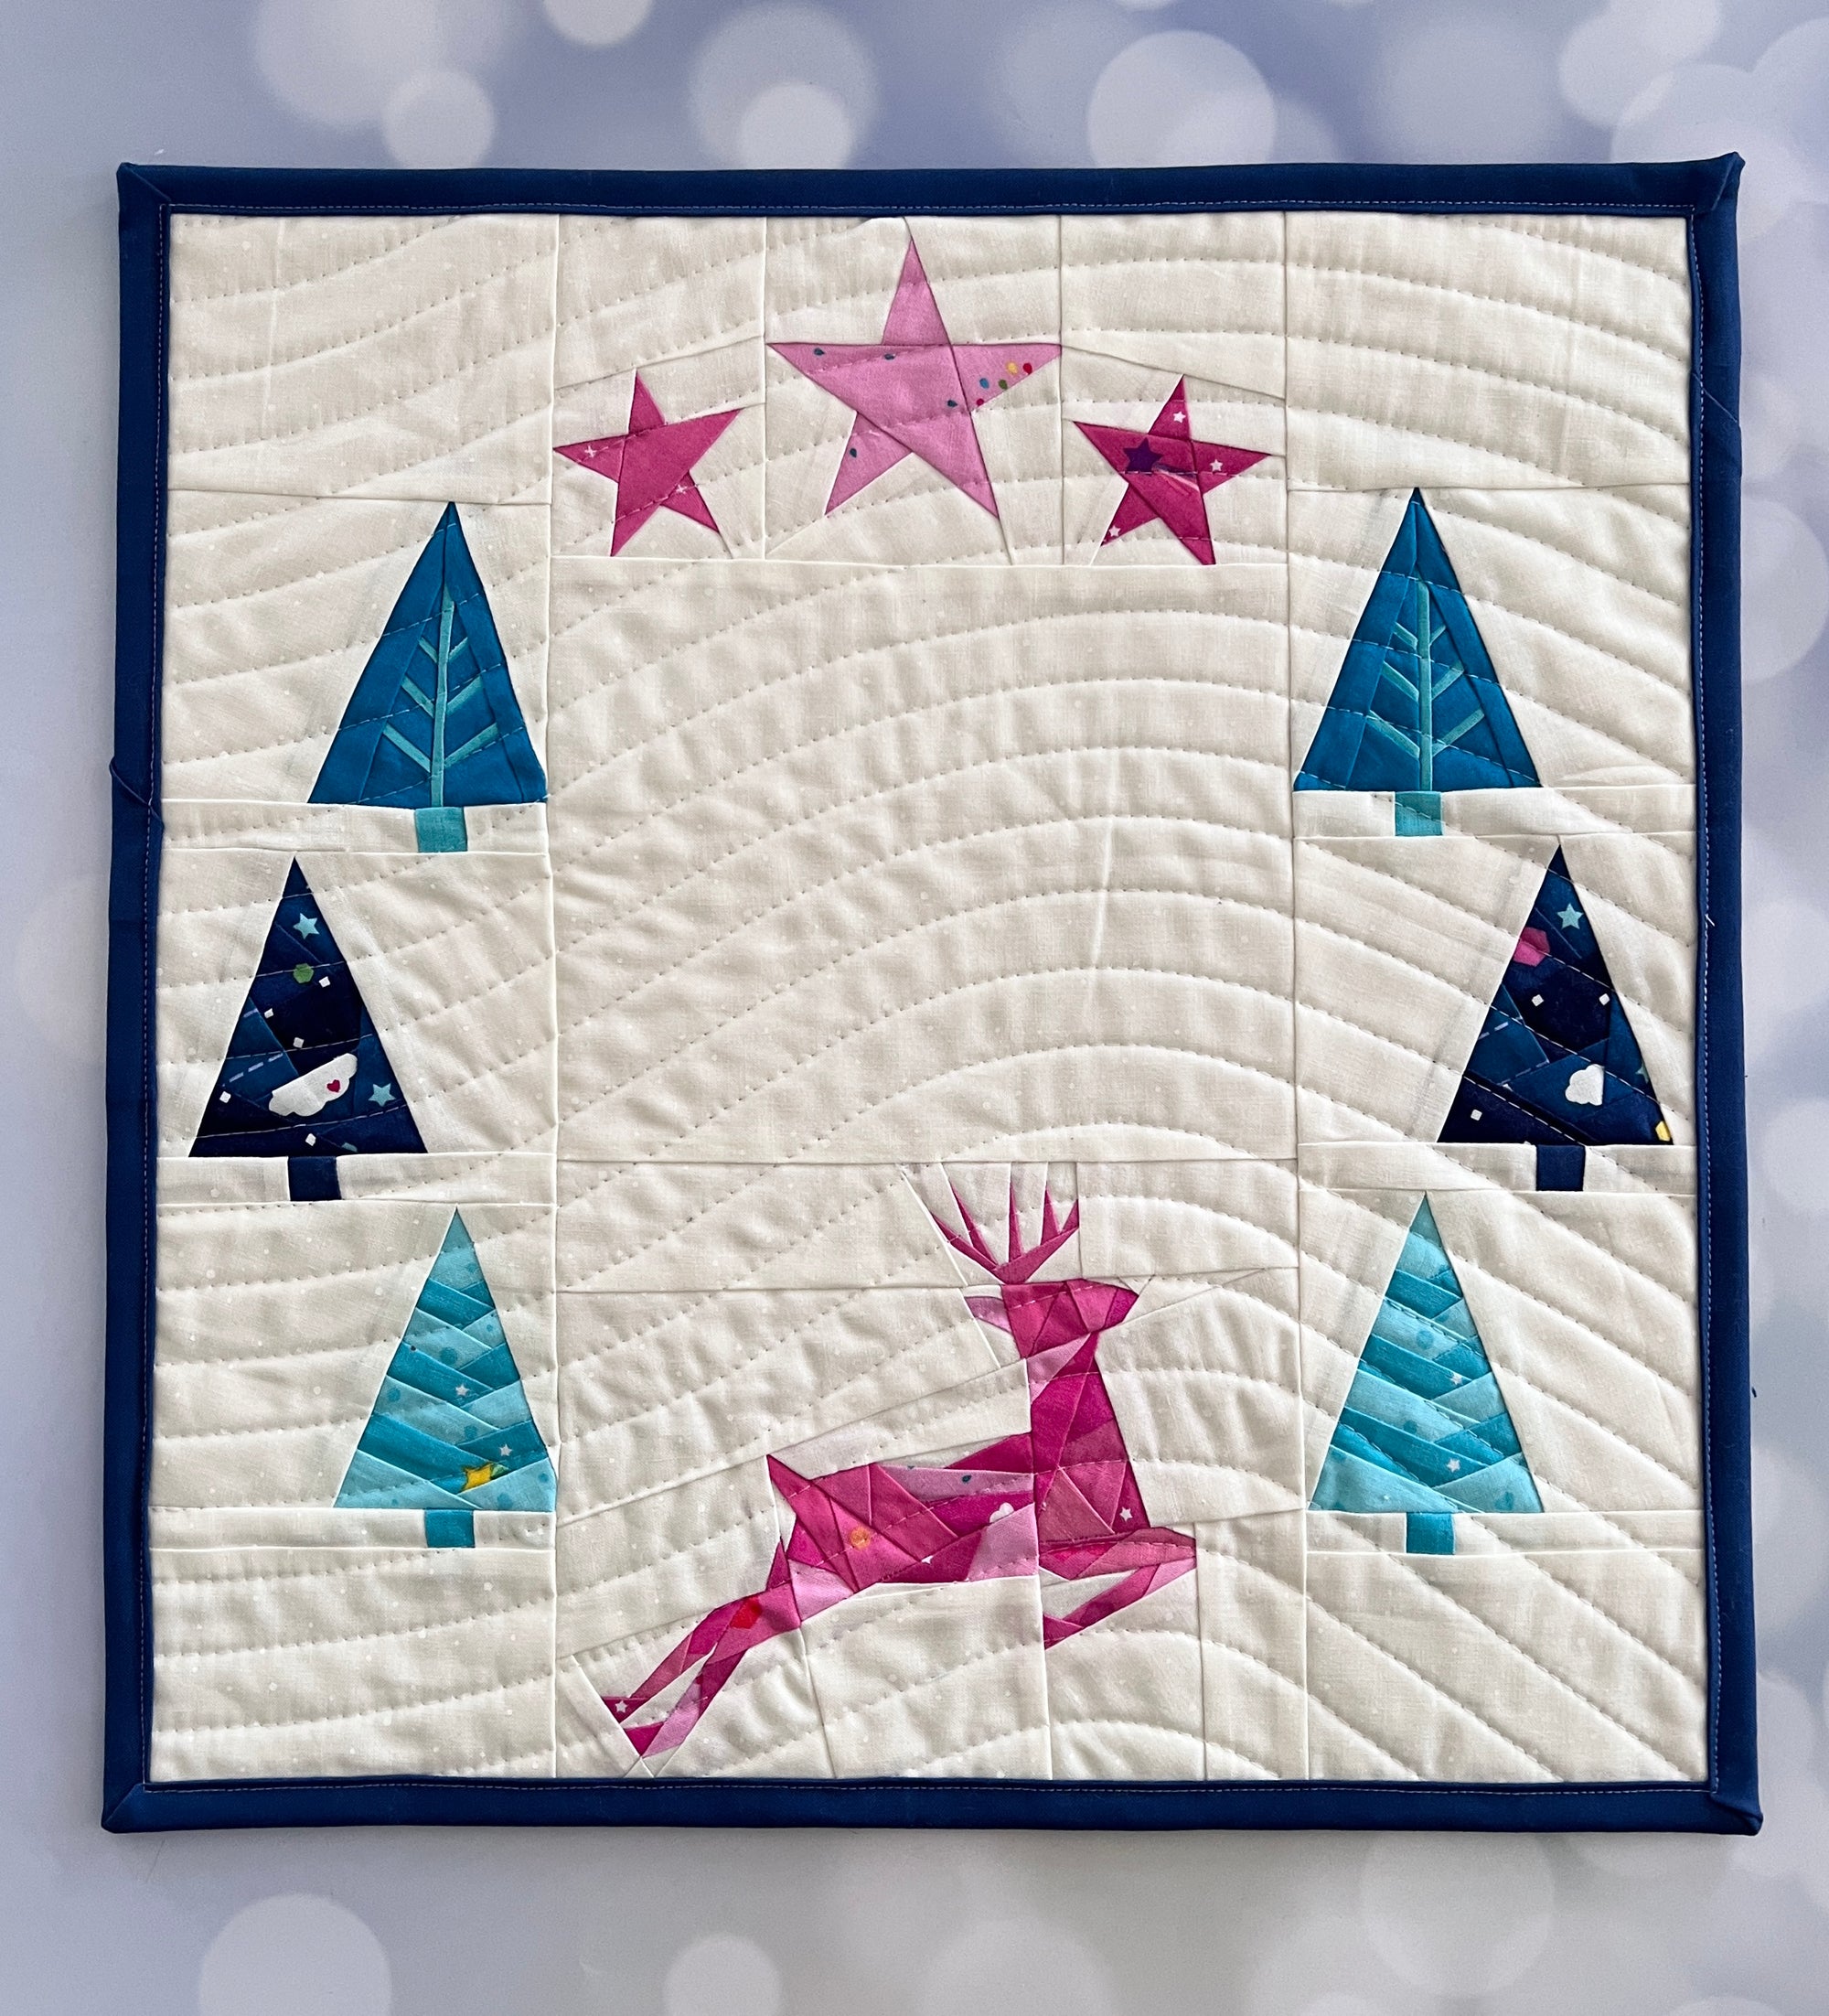 Frolic paper pieced pattern featuring a deer, trees and stars sewn in fabric for a mini quilt